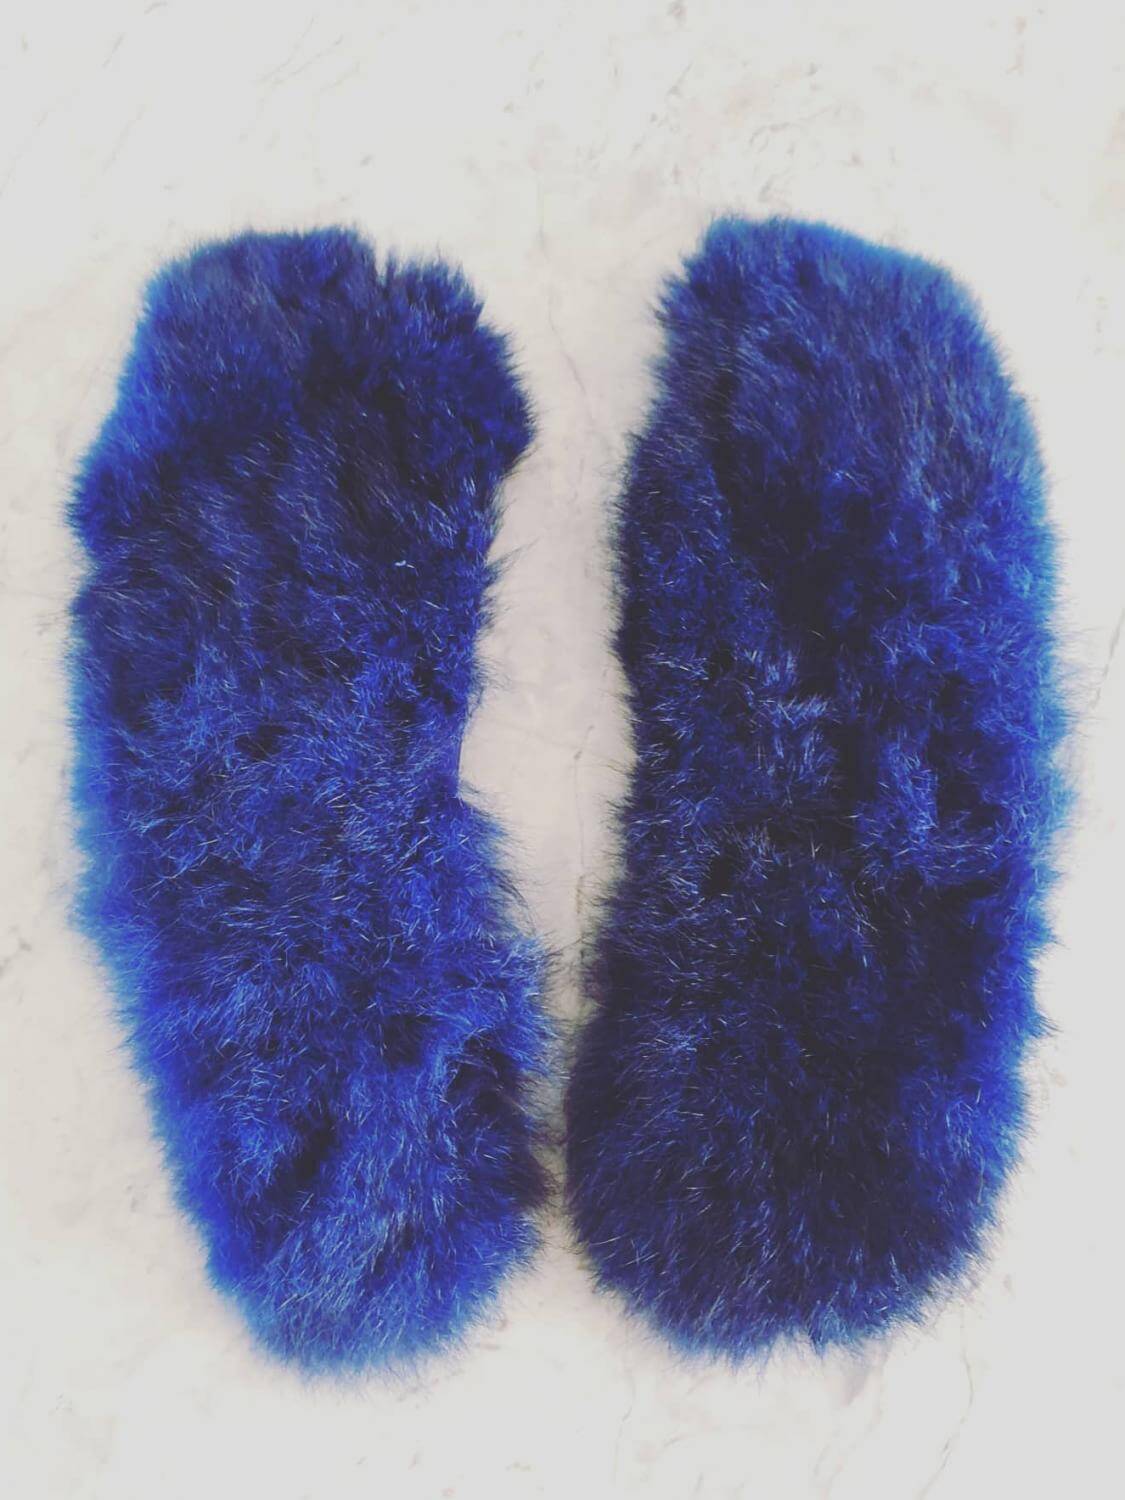 Possum fur innersoles for men and women to keep feet warm in many colors and sizes. Suitable for shoes and boots